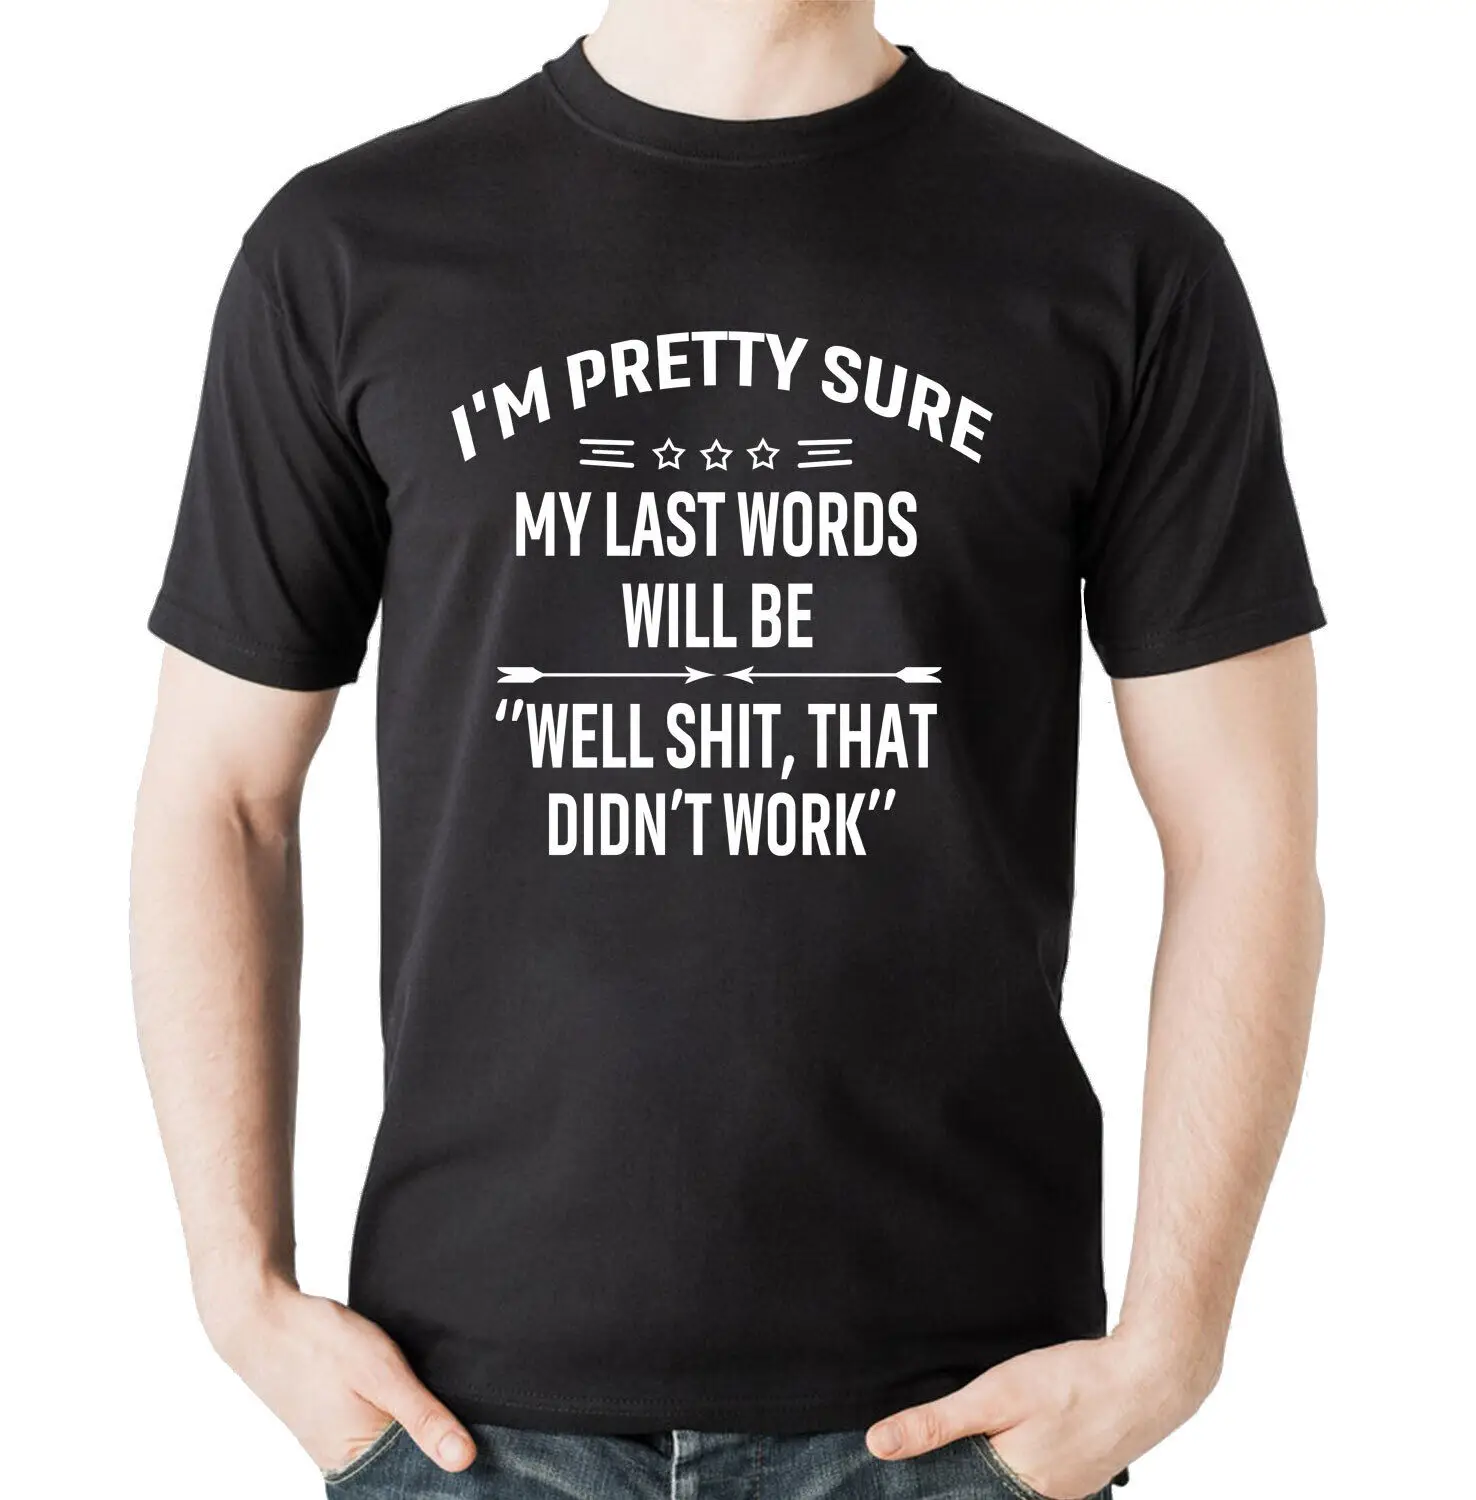 Im Pretty Sure My Last Words Will Be Gothic New Men's Tshirt Summer Clothes Fashion Short-Sleeve Japanese T-shirt Cool Tops Tees